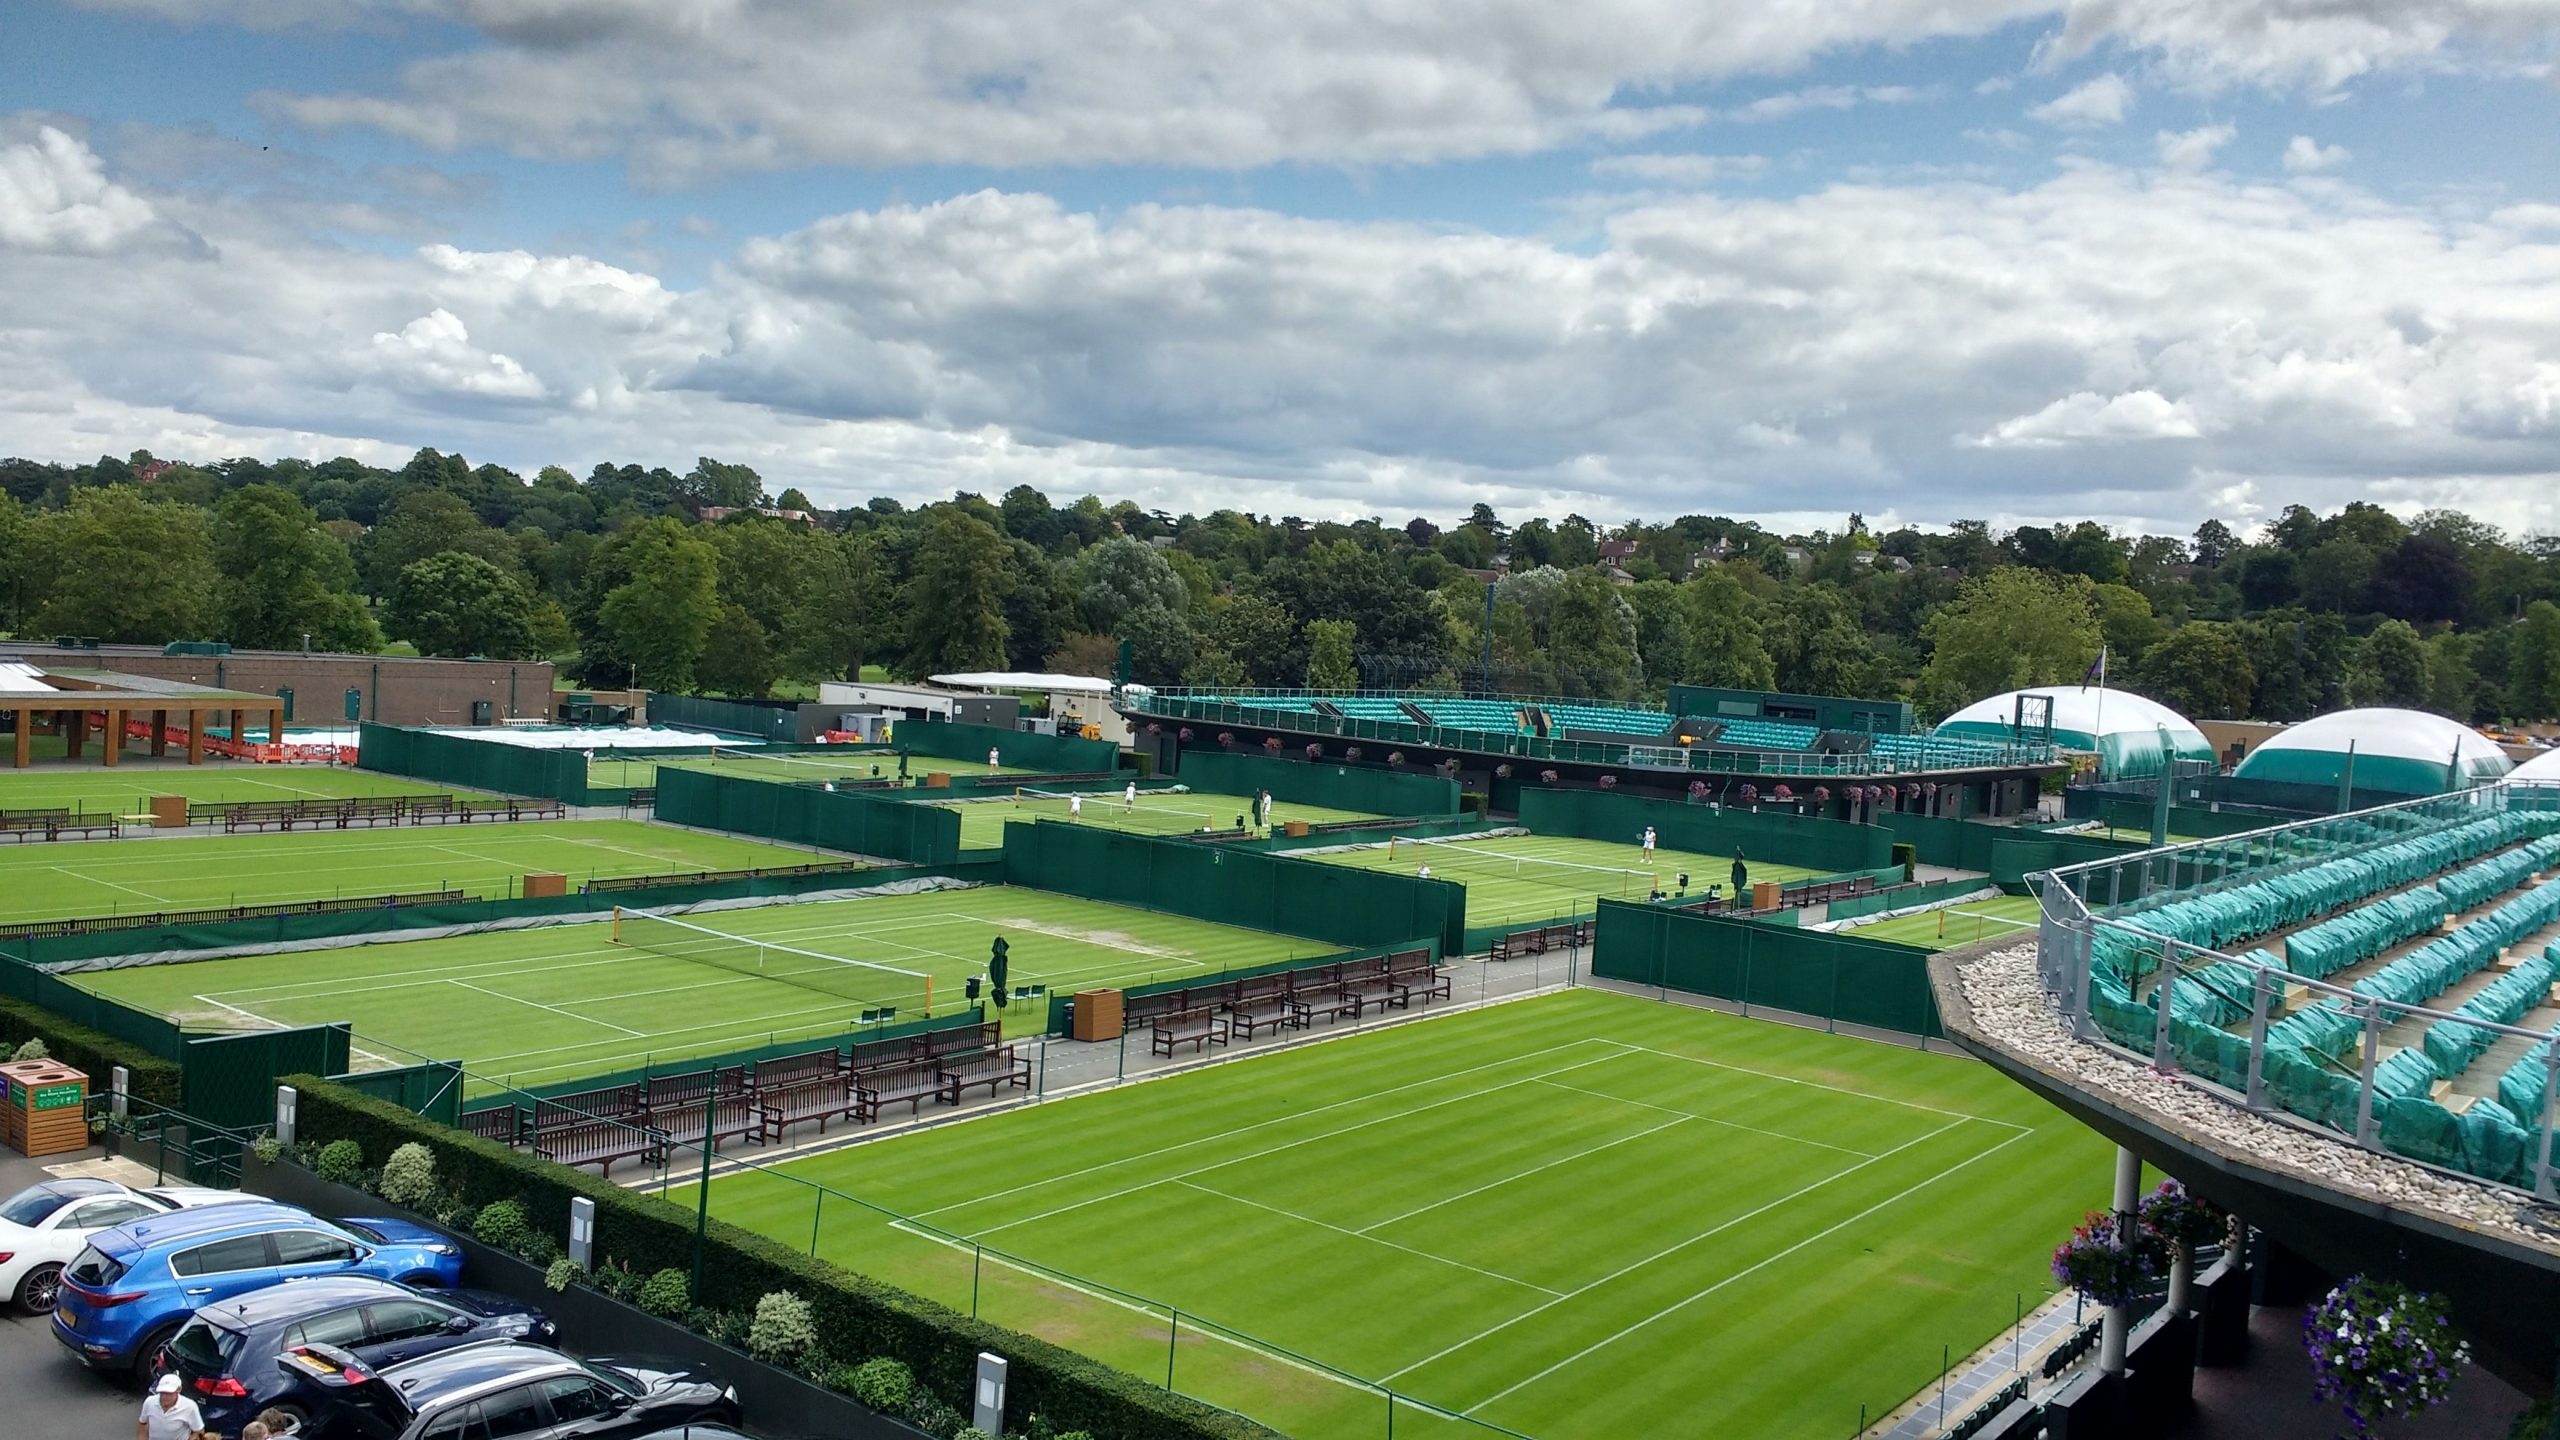 Wimbledon likely to return in 2021 even without fans